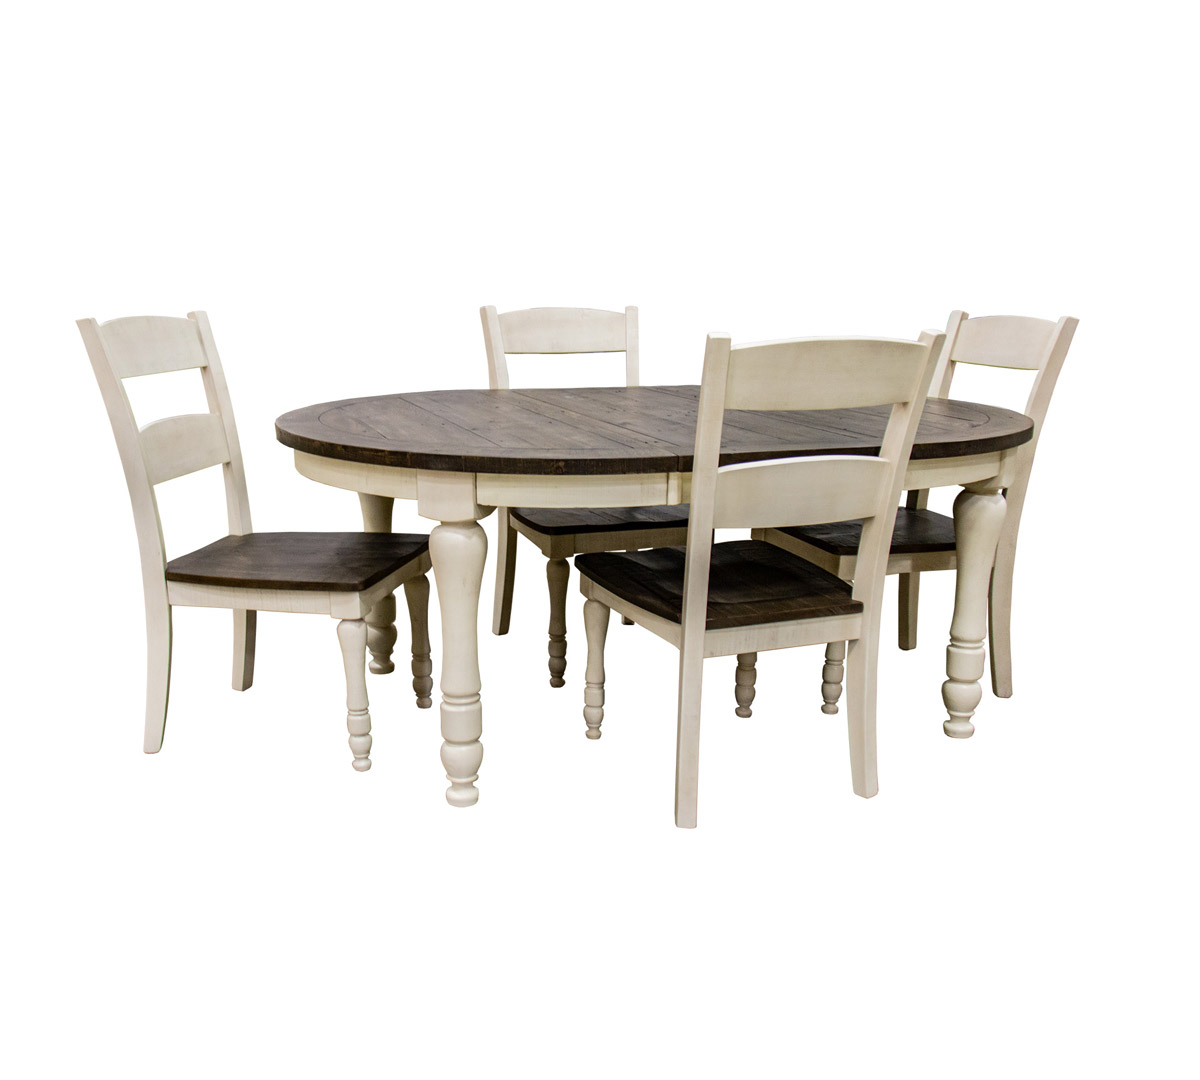 Jofran Madison County Oval Dining Table & 4 Chairs